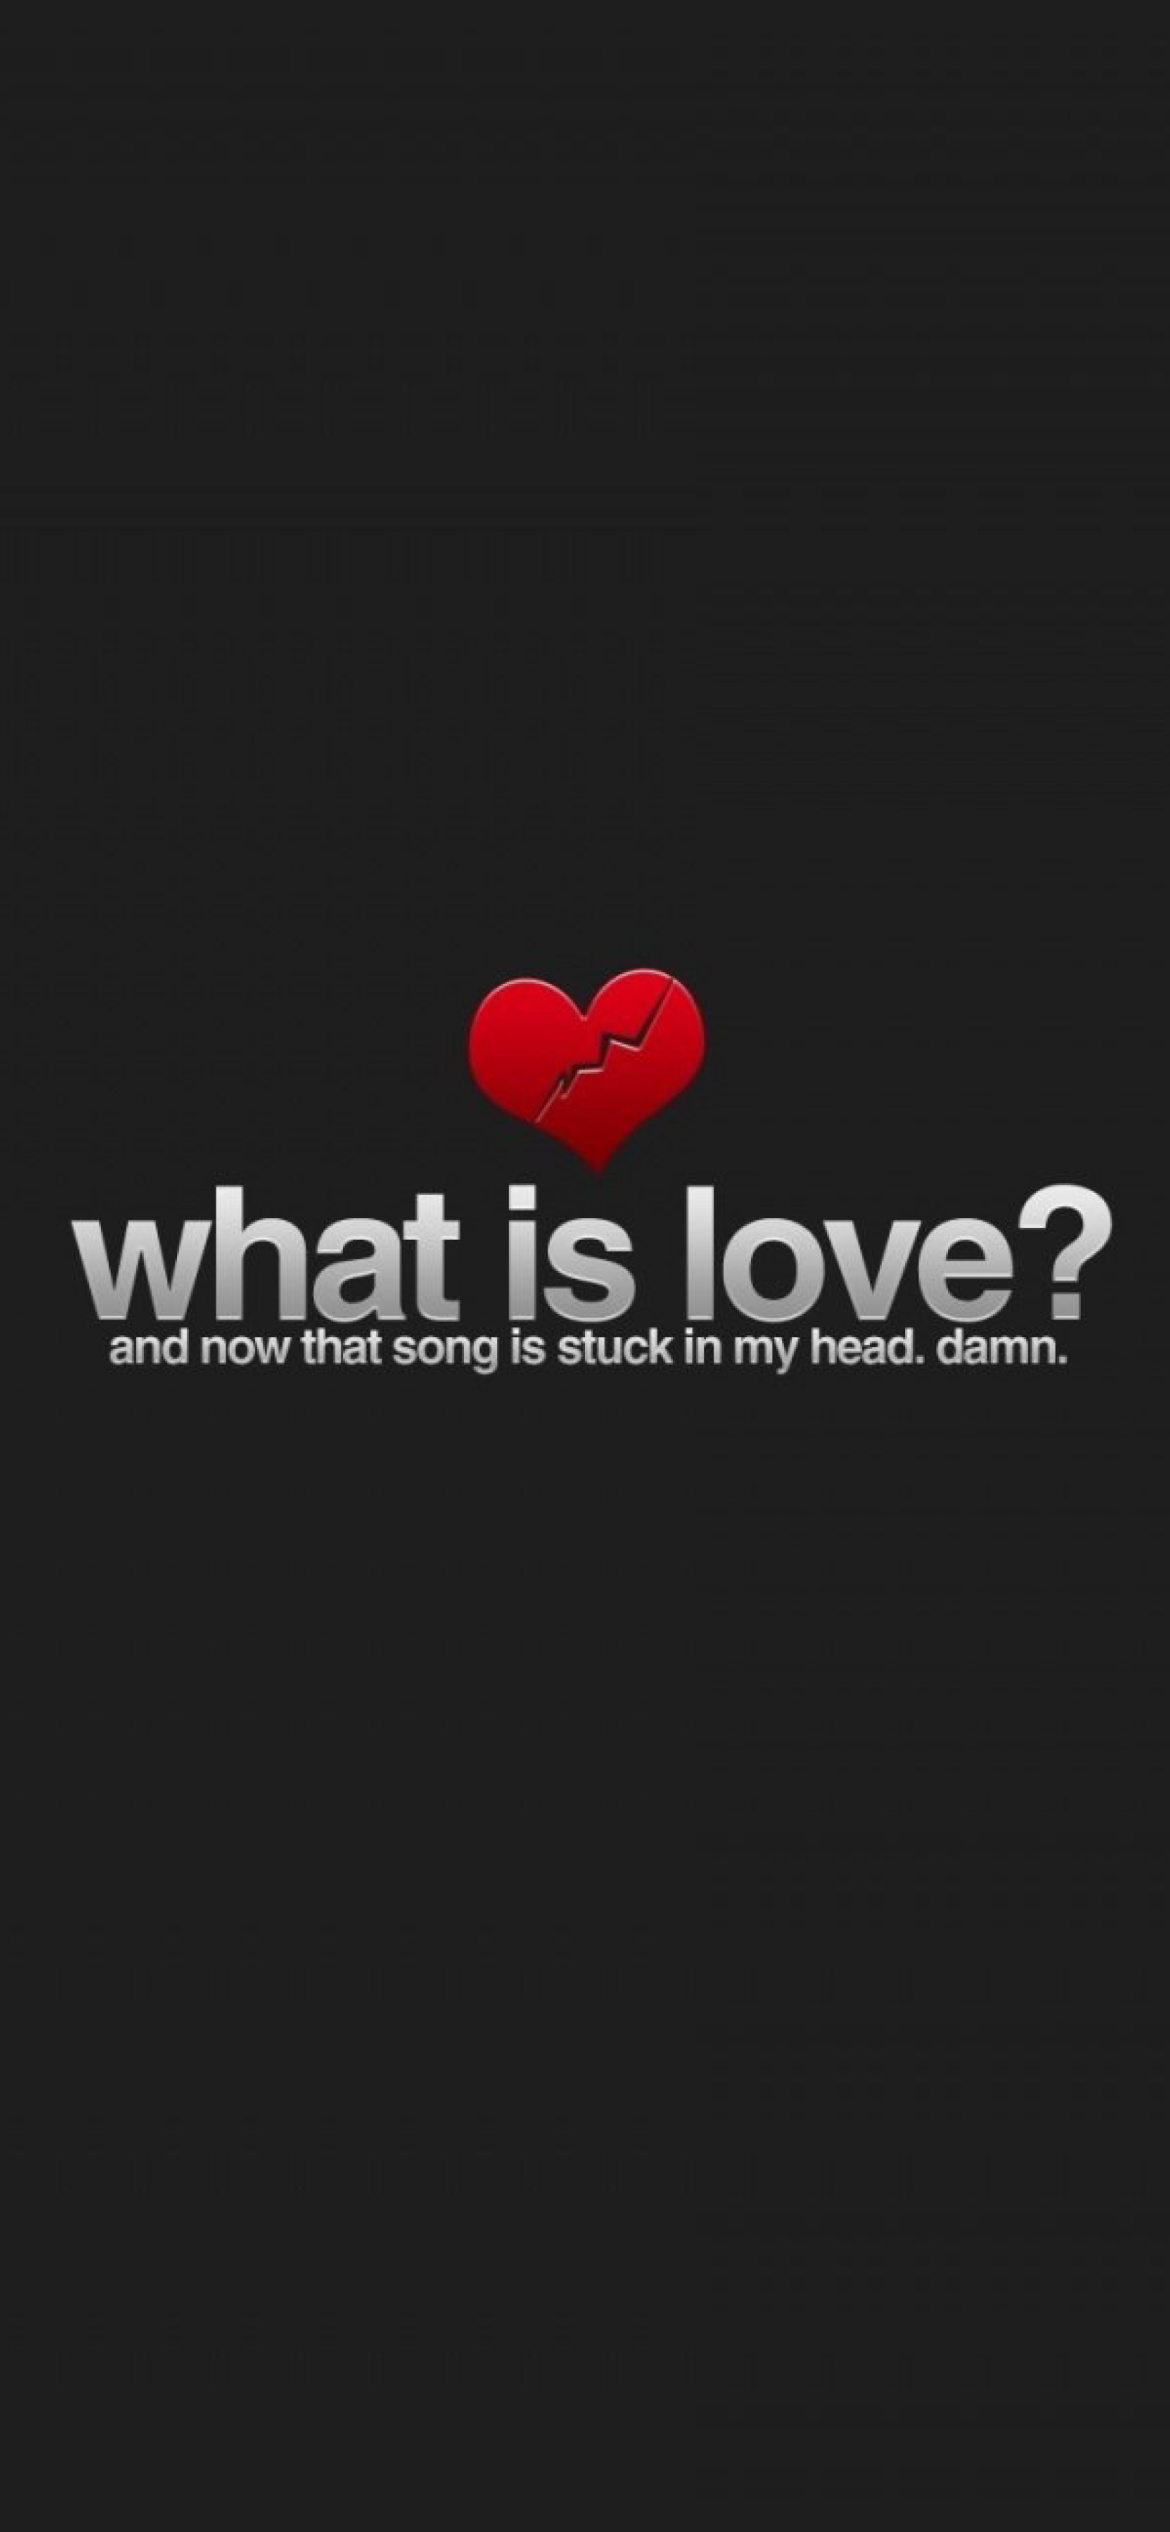 What is Love wallpaper 1170x2532